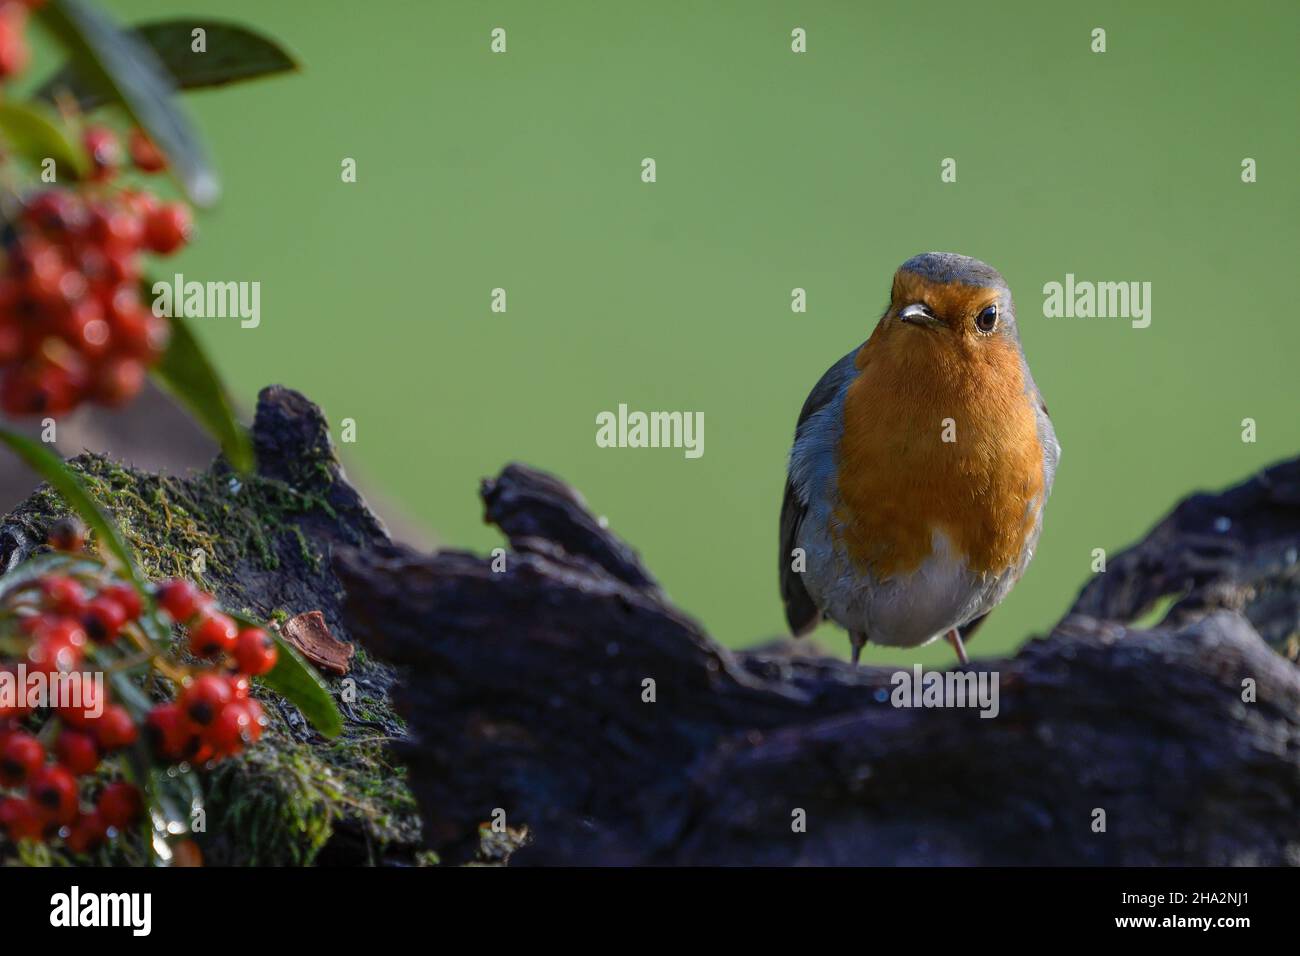 Close-up of robin perched on a log Stock Photo